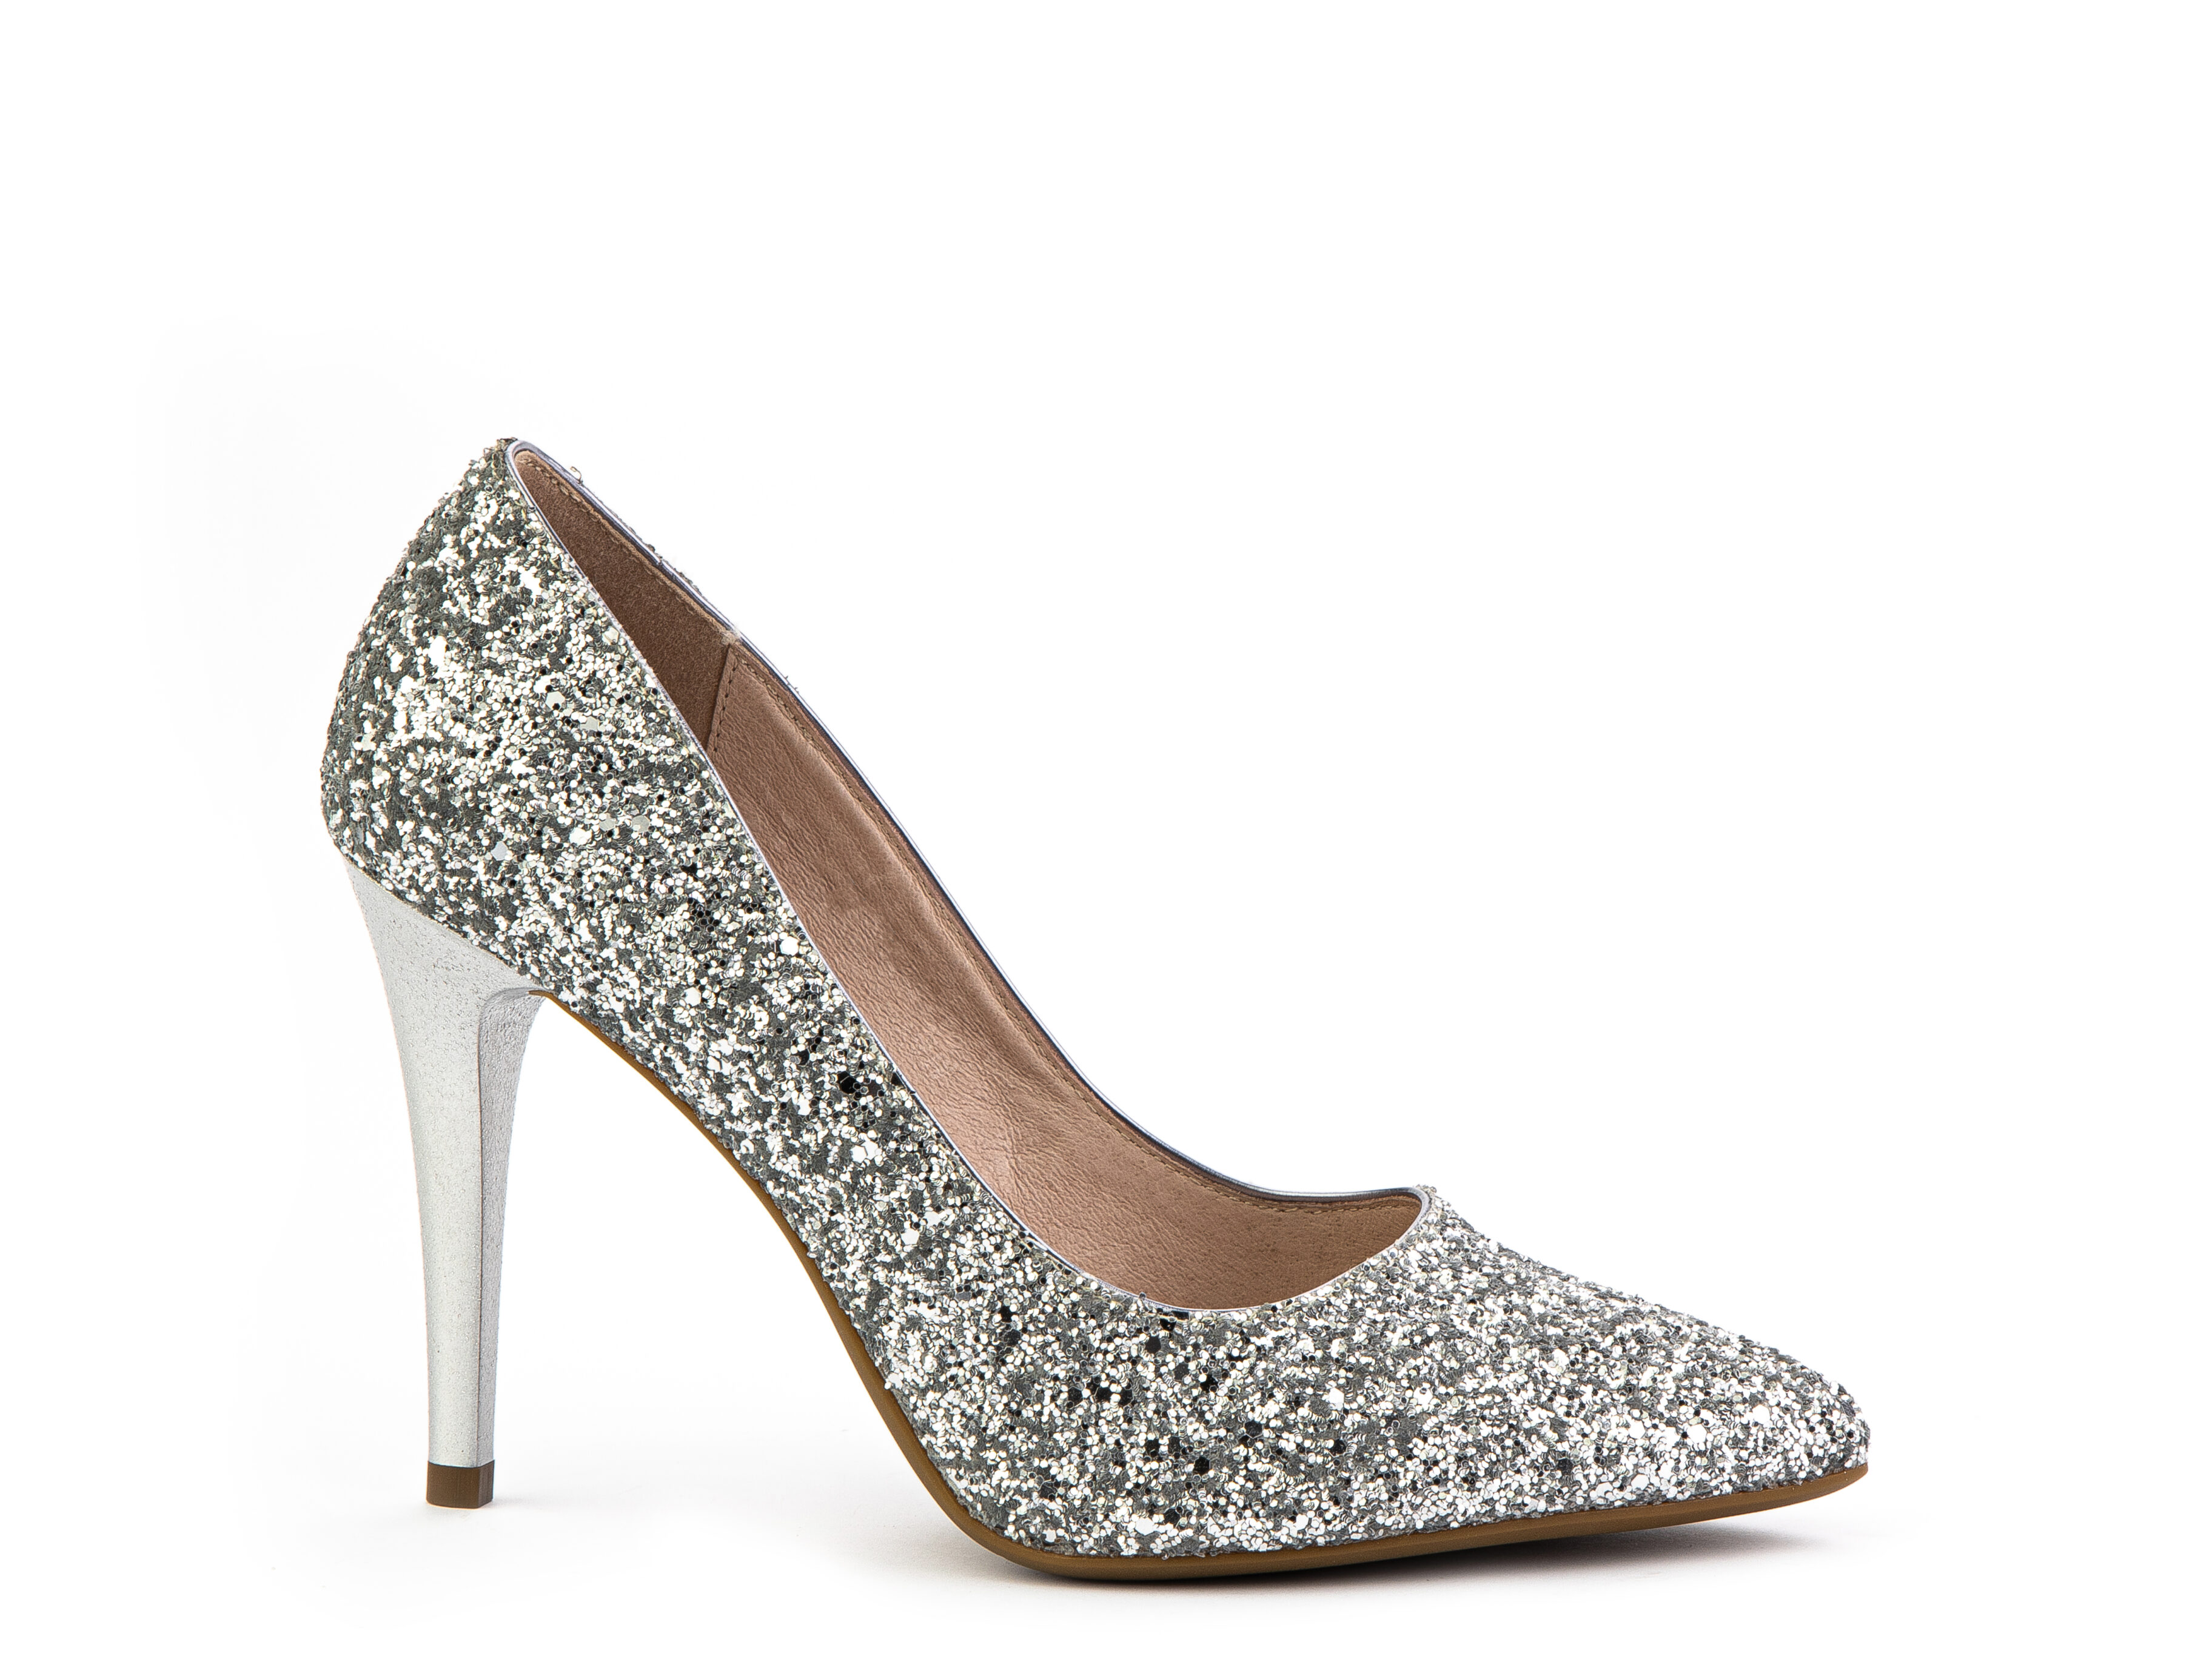 Shoes with Silver Glitters and a High Silver Heel